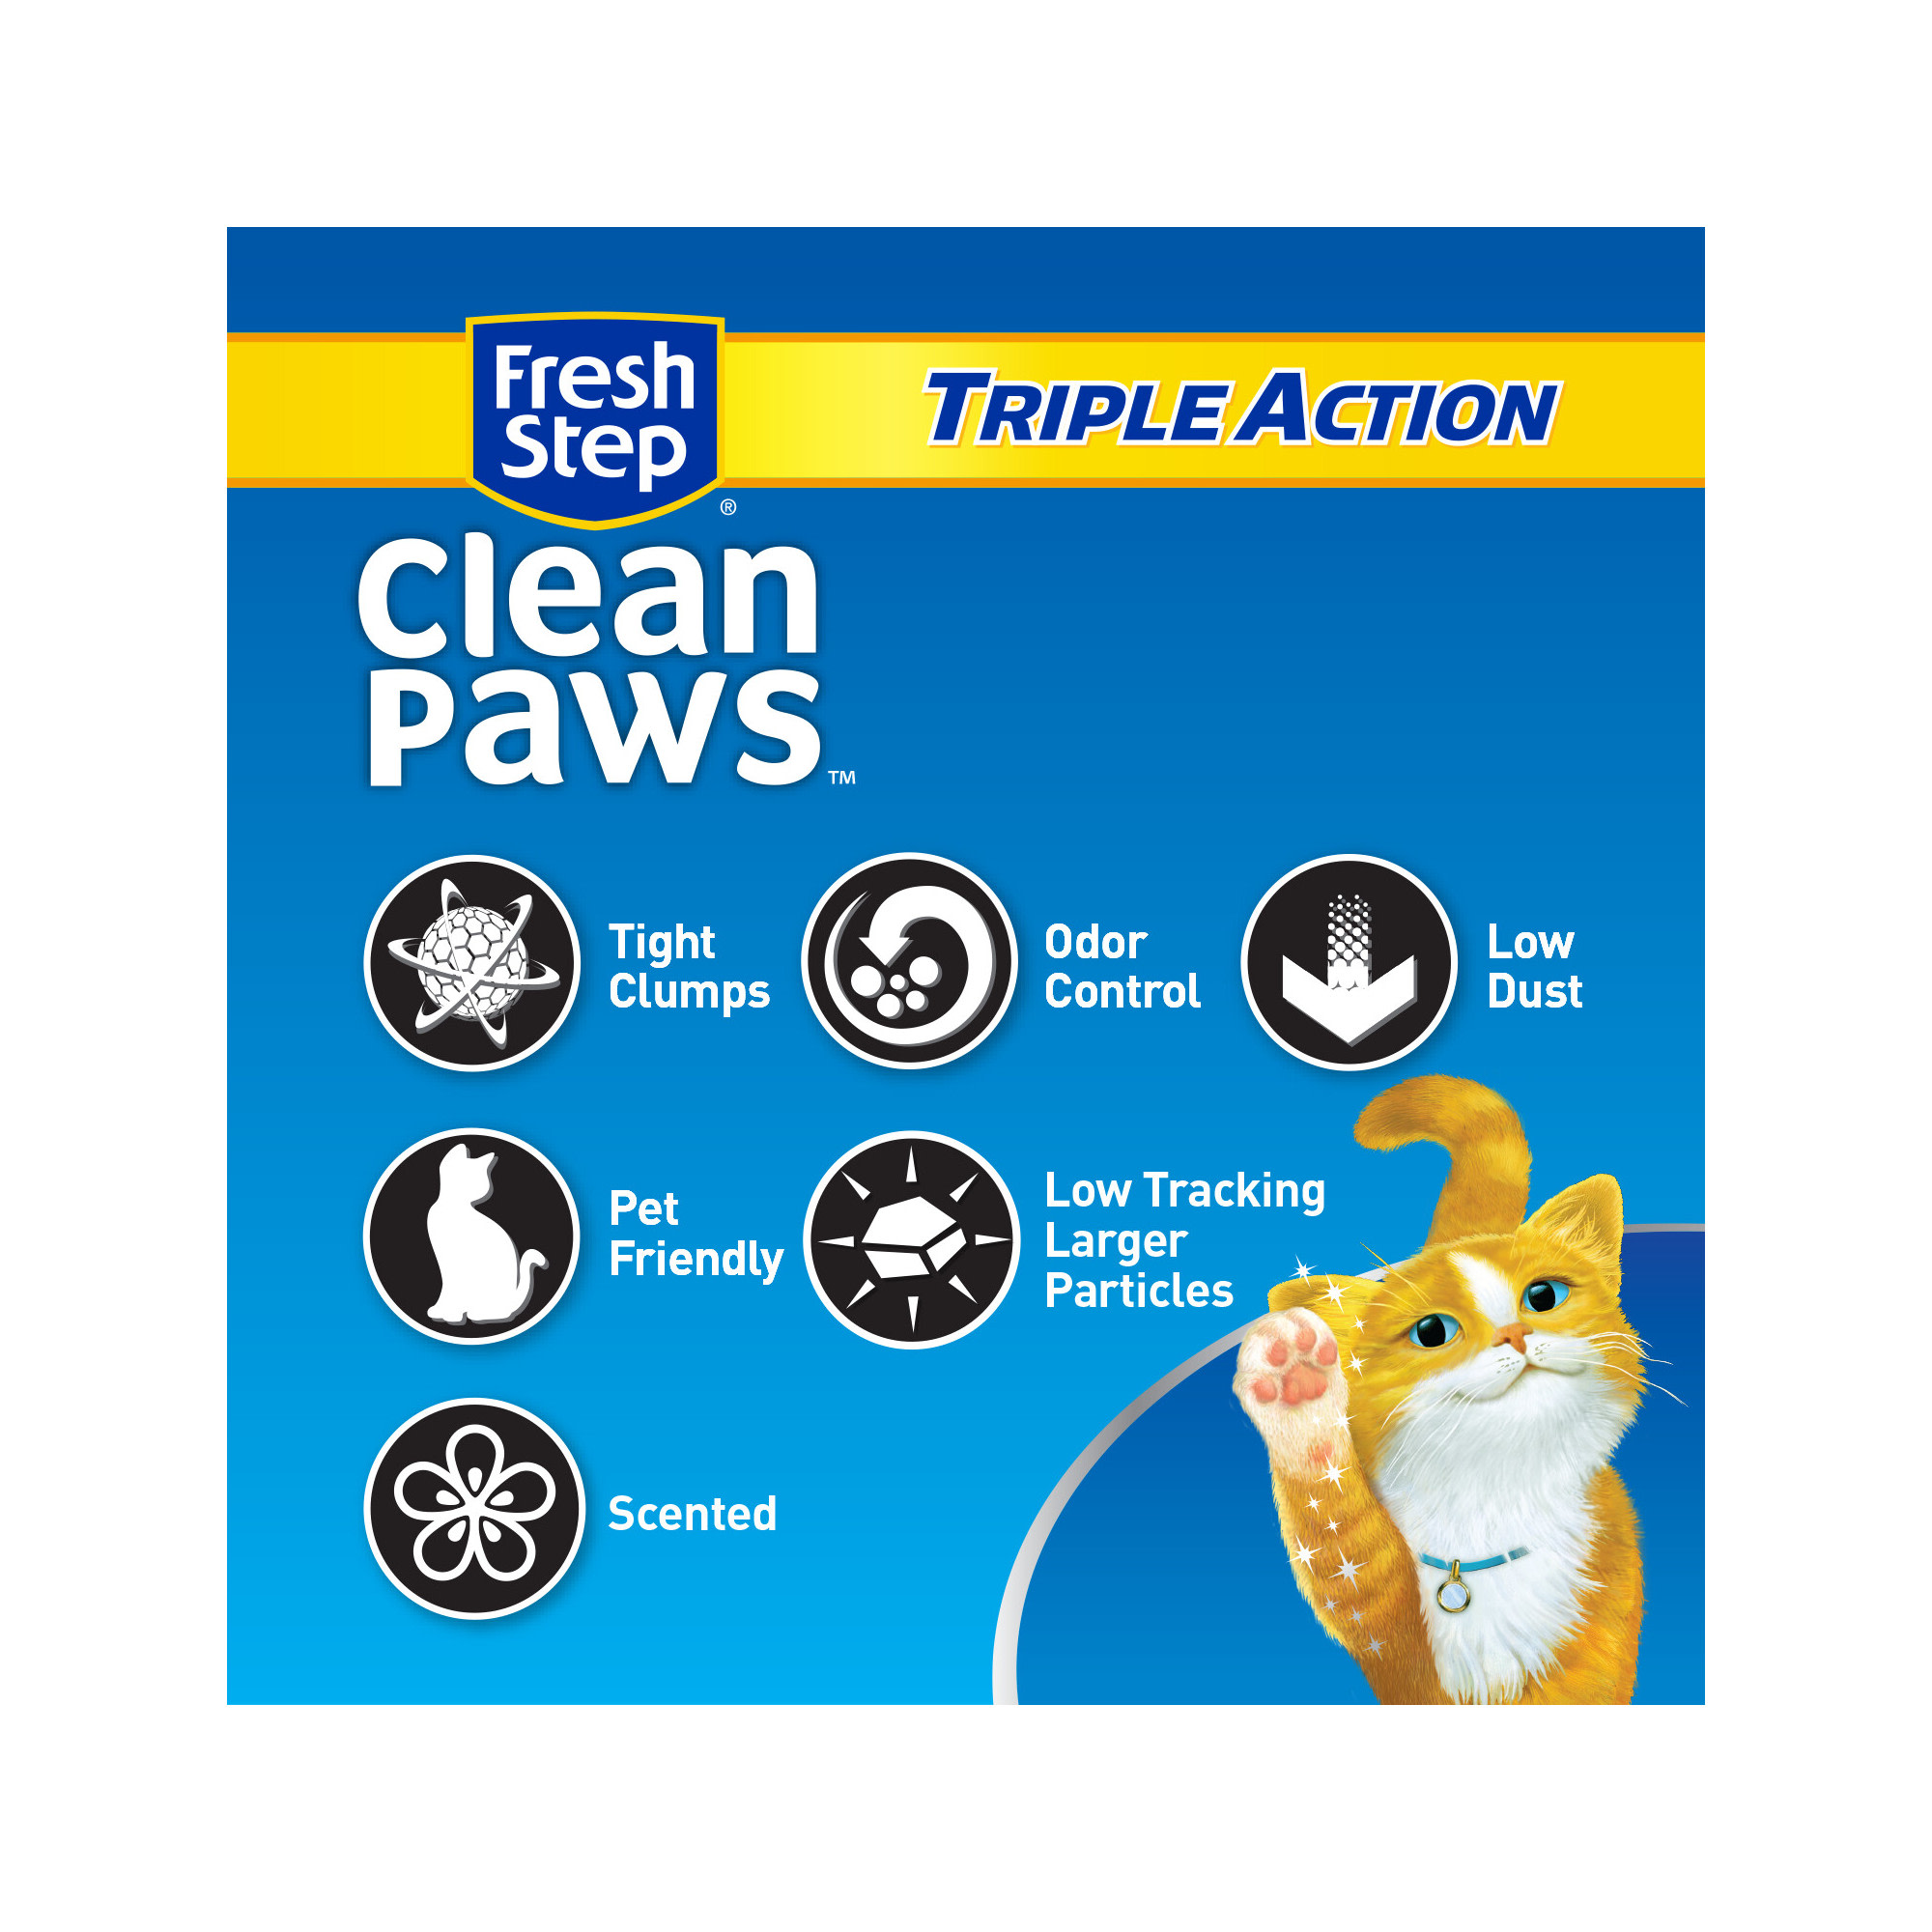 Fresh Step Clean Paws Triple Action Scented Clumping Cat Litter, 22.5 lbs.